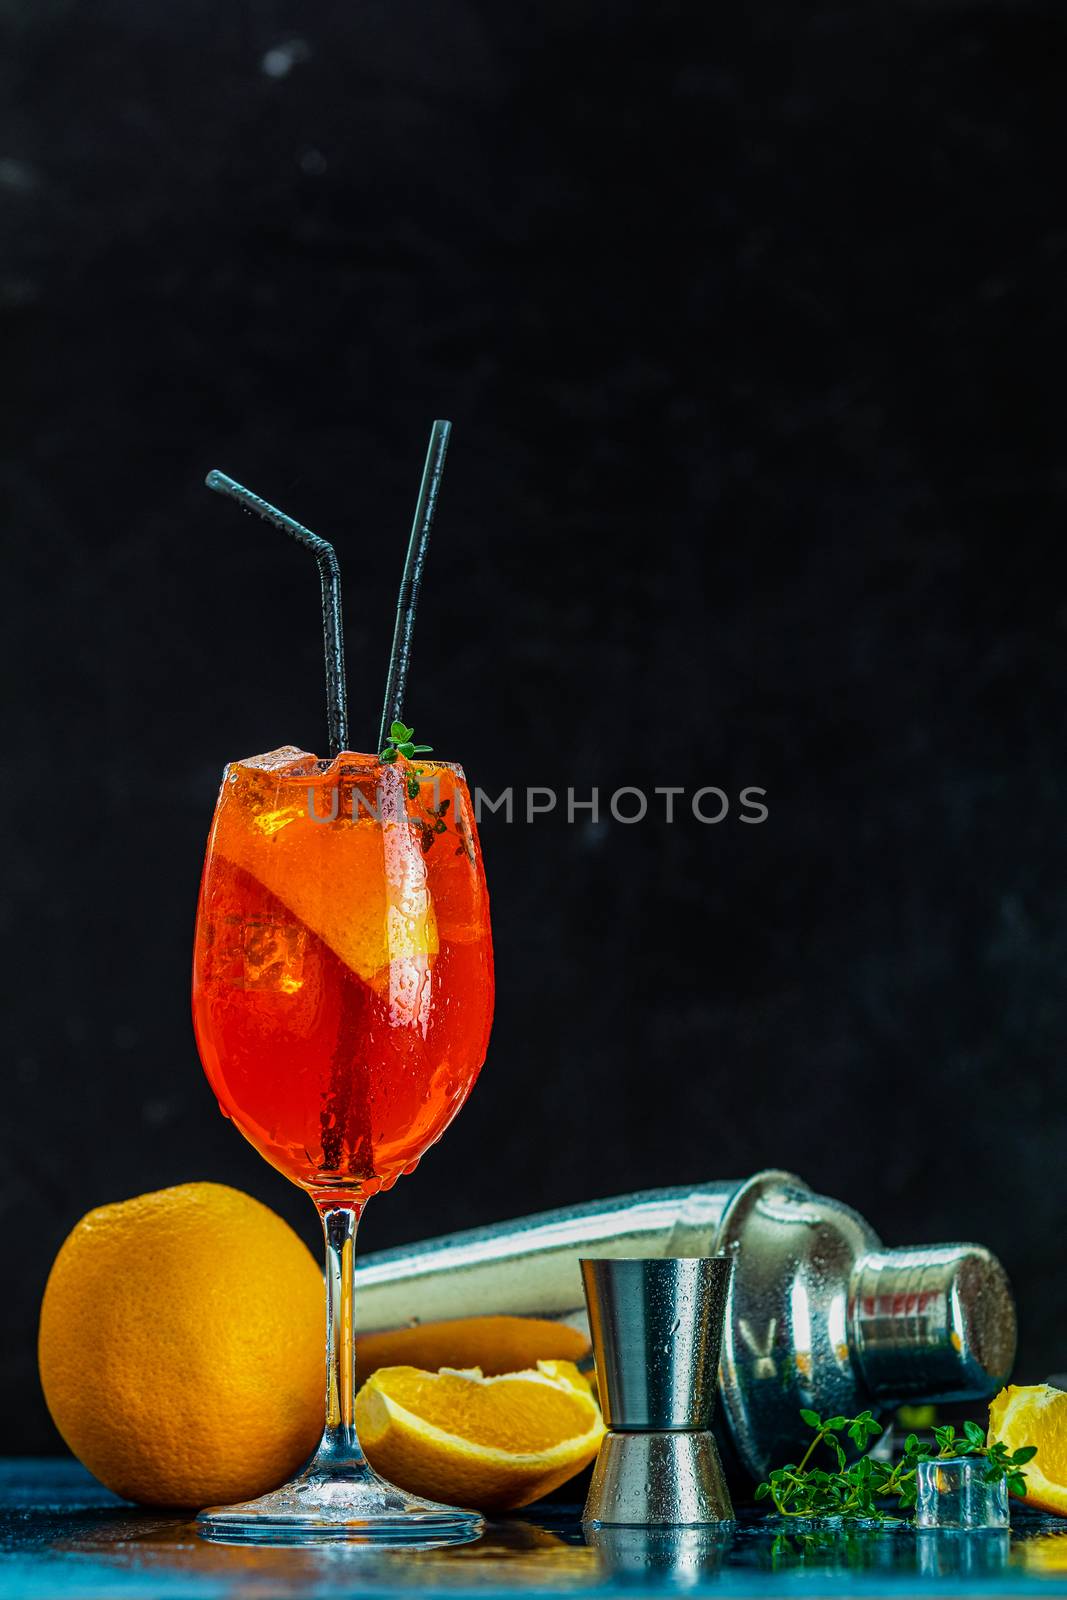 Cocktail aperol spritz in big wine glass with water drops on dark background. Summer alcohol cocktail with orange slices. Italian cocktail aperol spritz on slate board. Trendy beverage